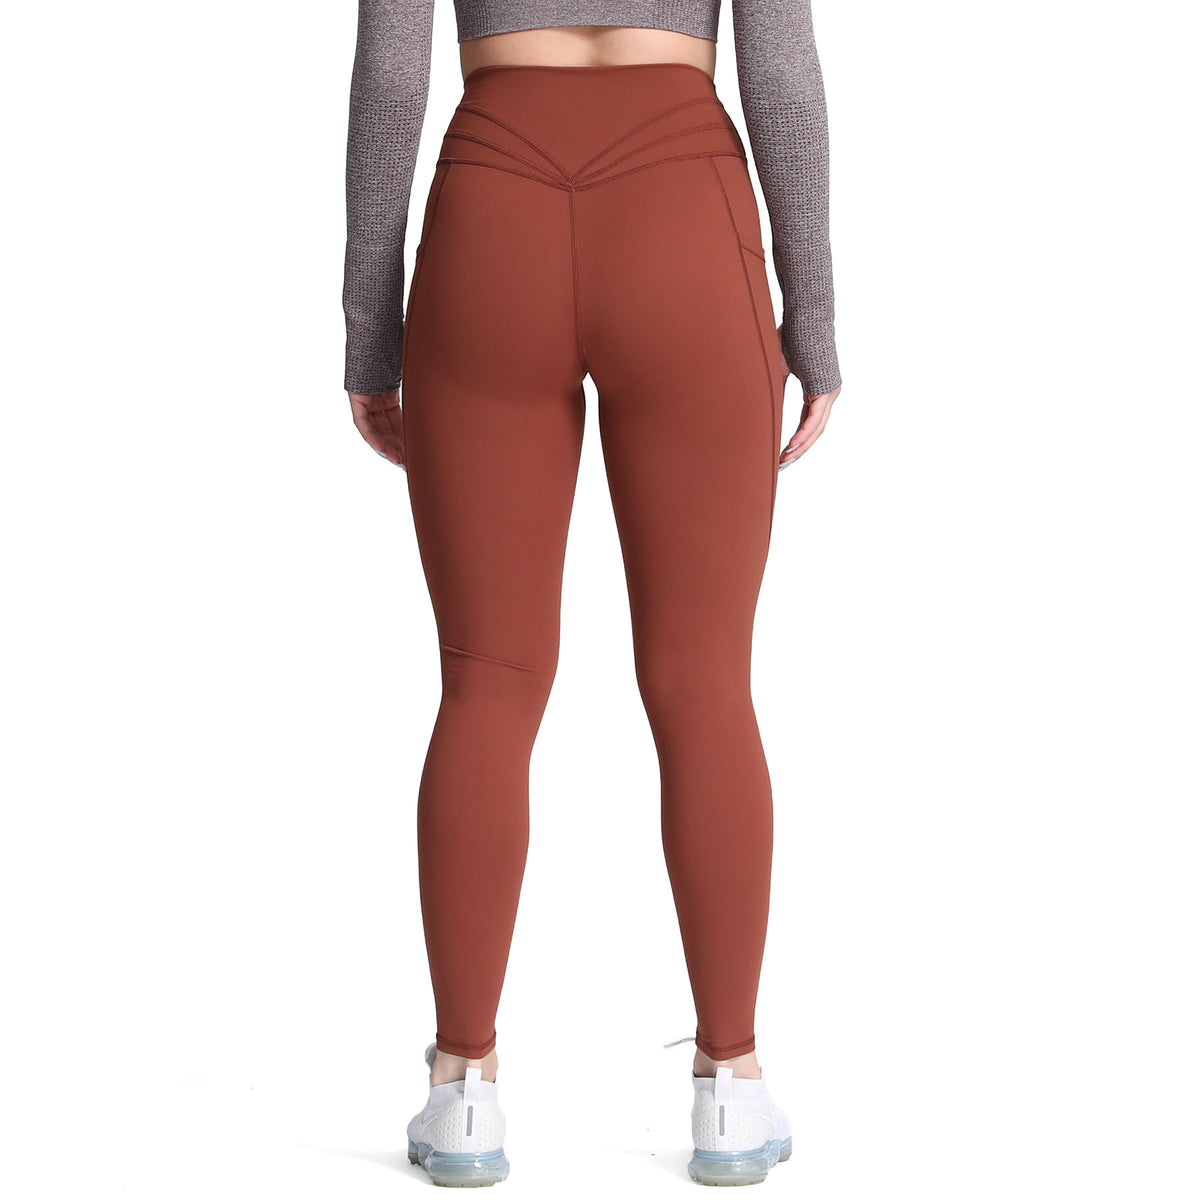  Aoxjox High Waisted Workout Leggings for Women GEO